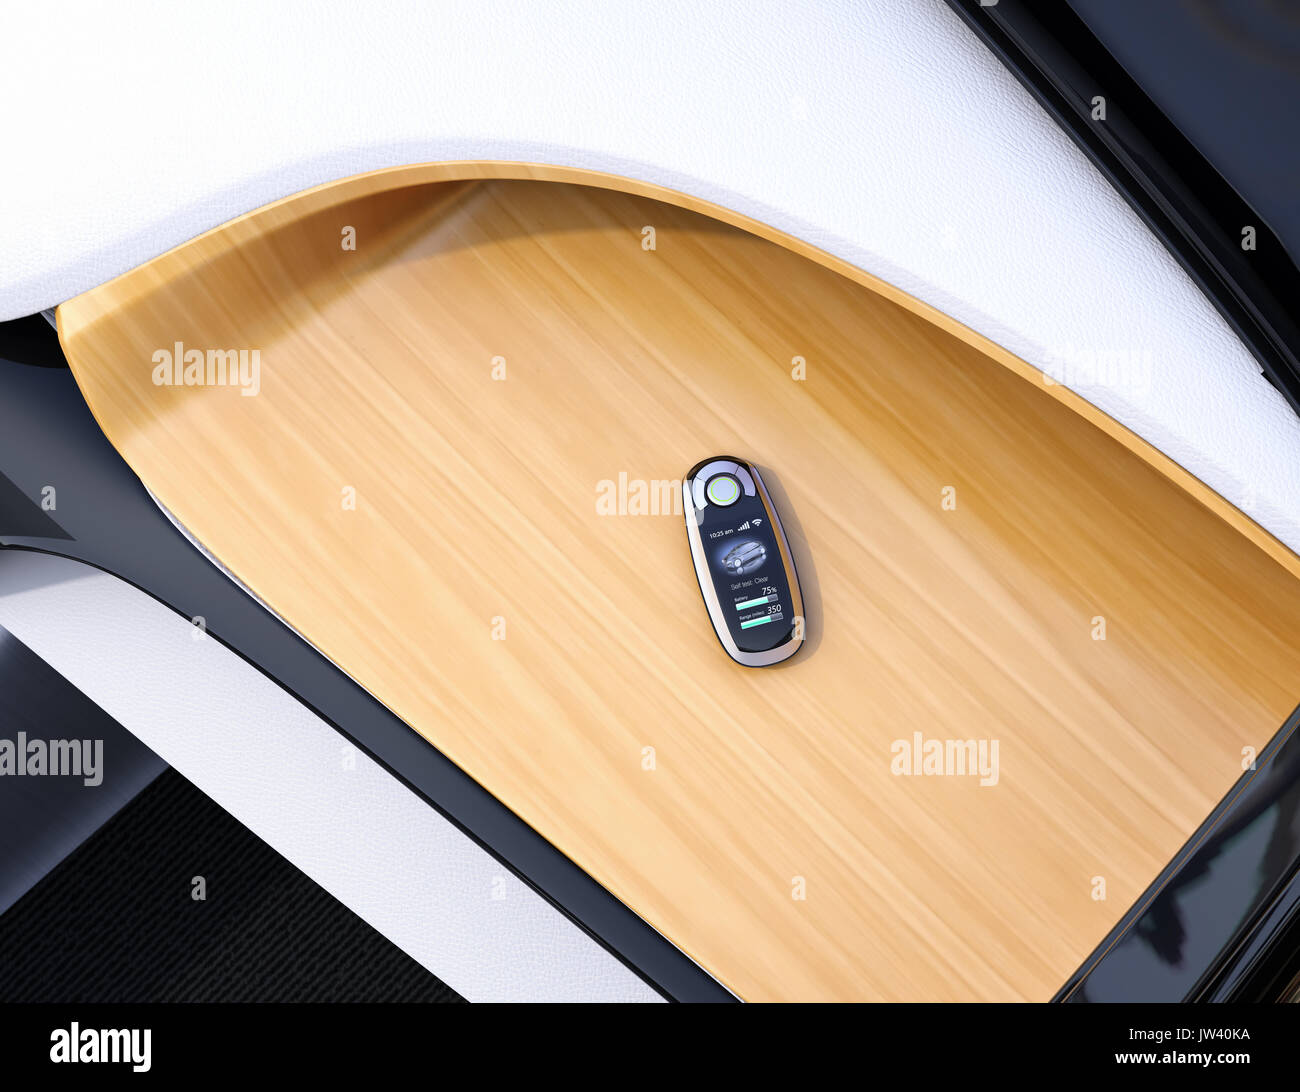 Smart car key on electric car's dashboard. 3D rendering image. Stock Photo